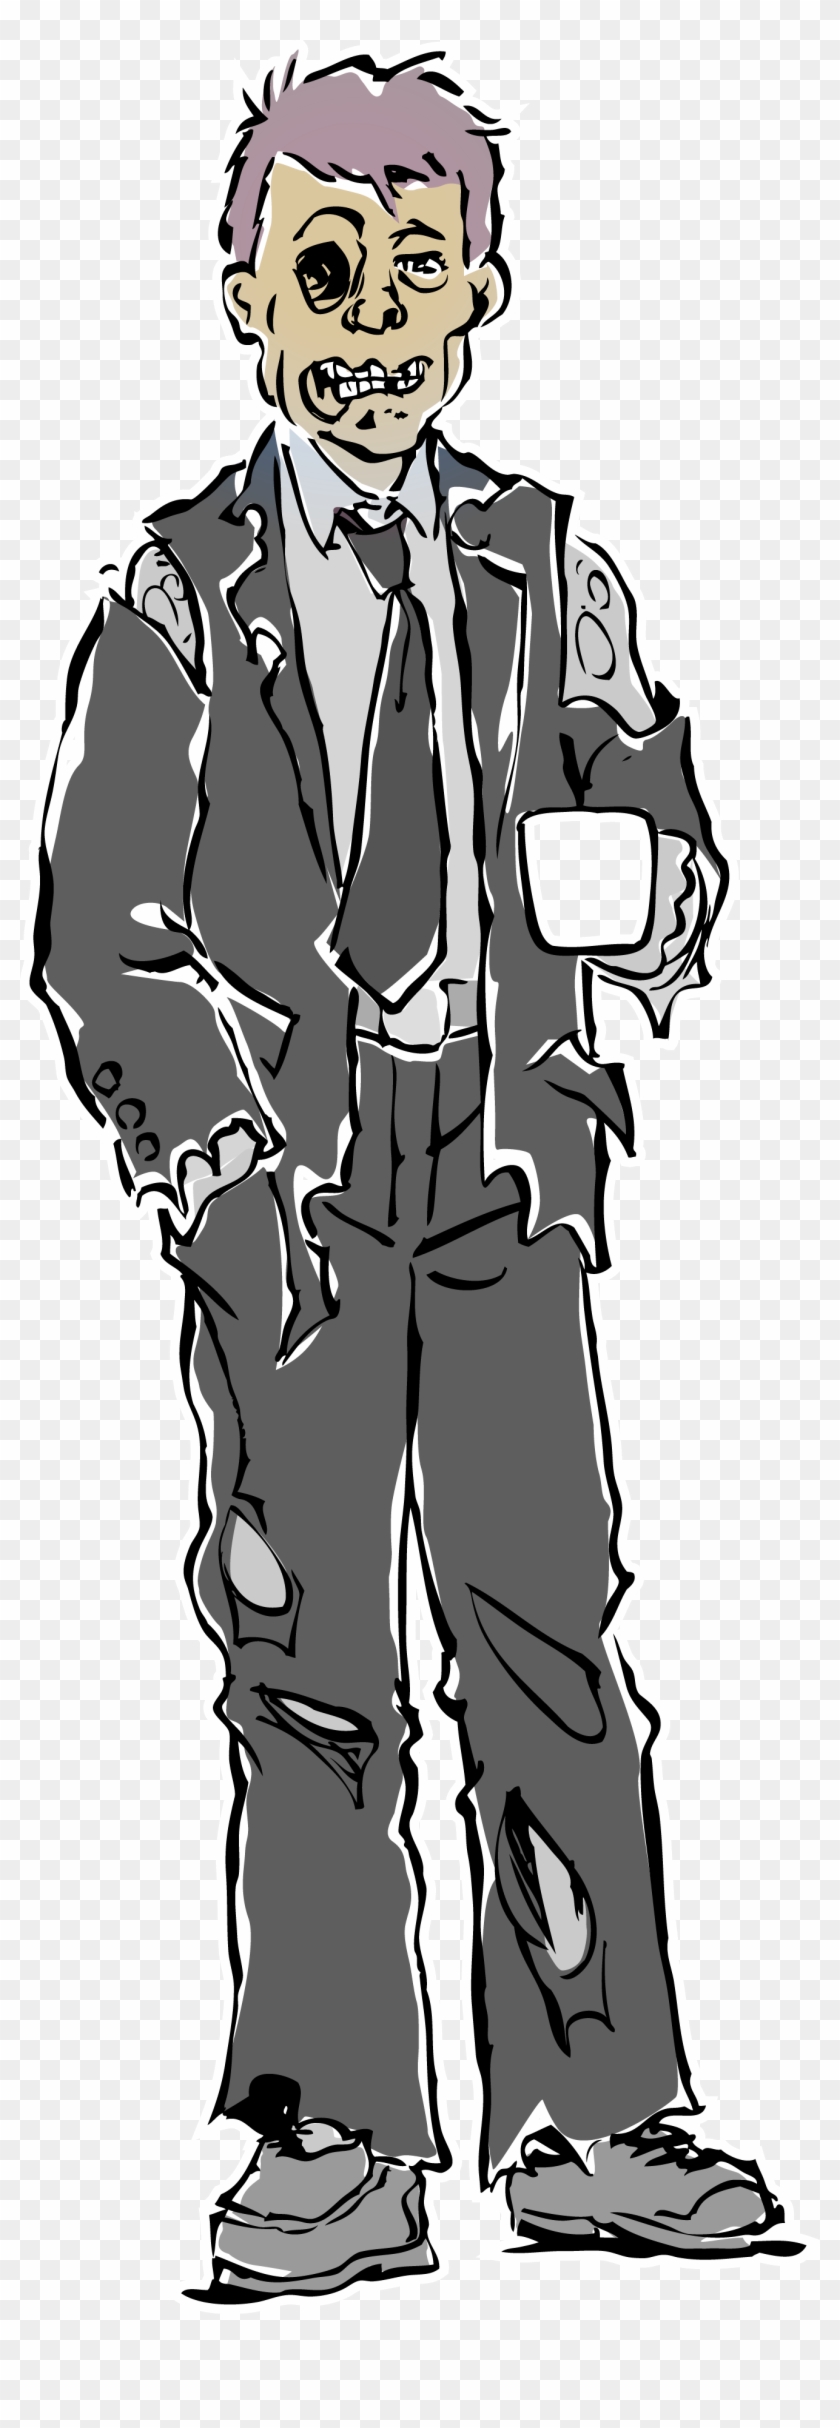 Coffee Drinking Zombie - Illustration Clipart #674308